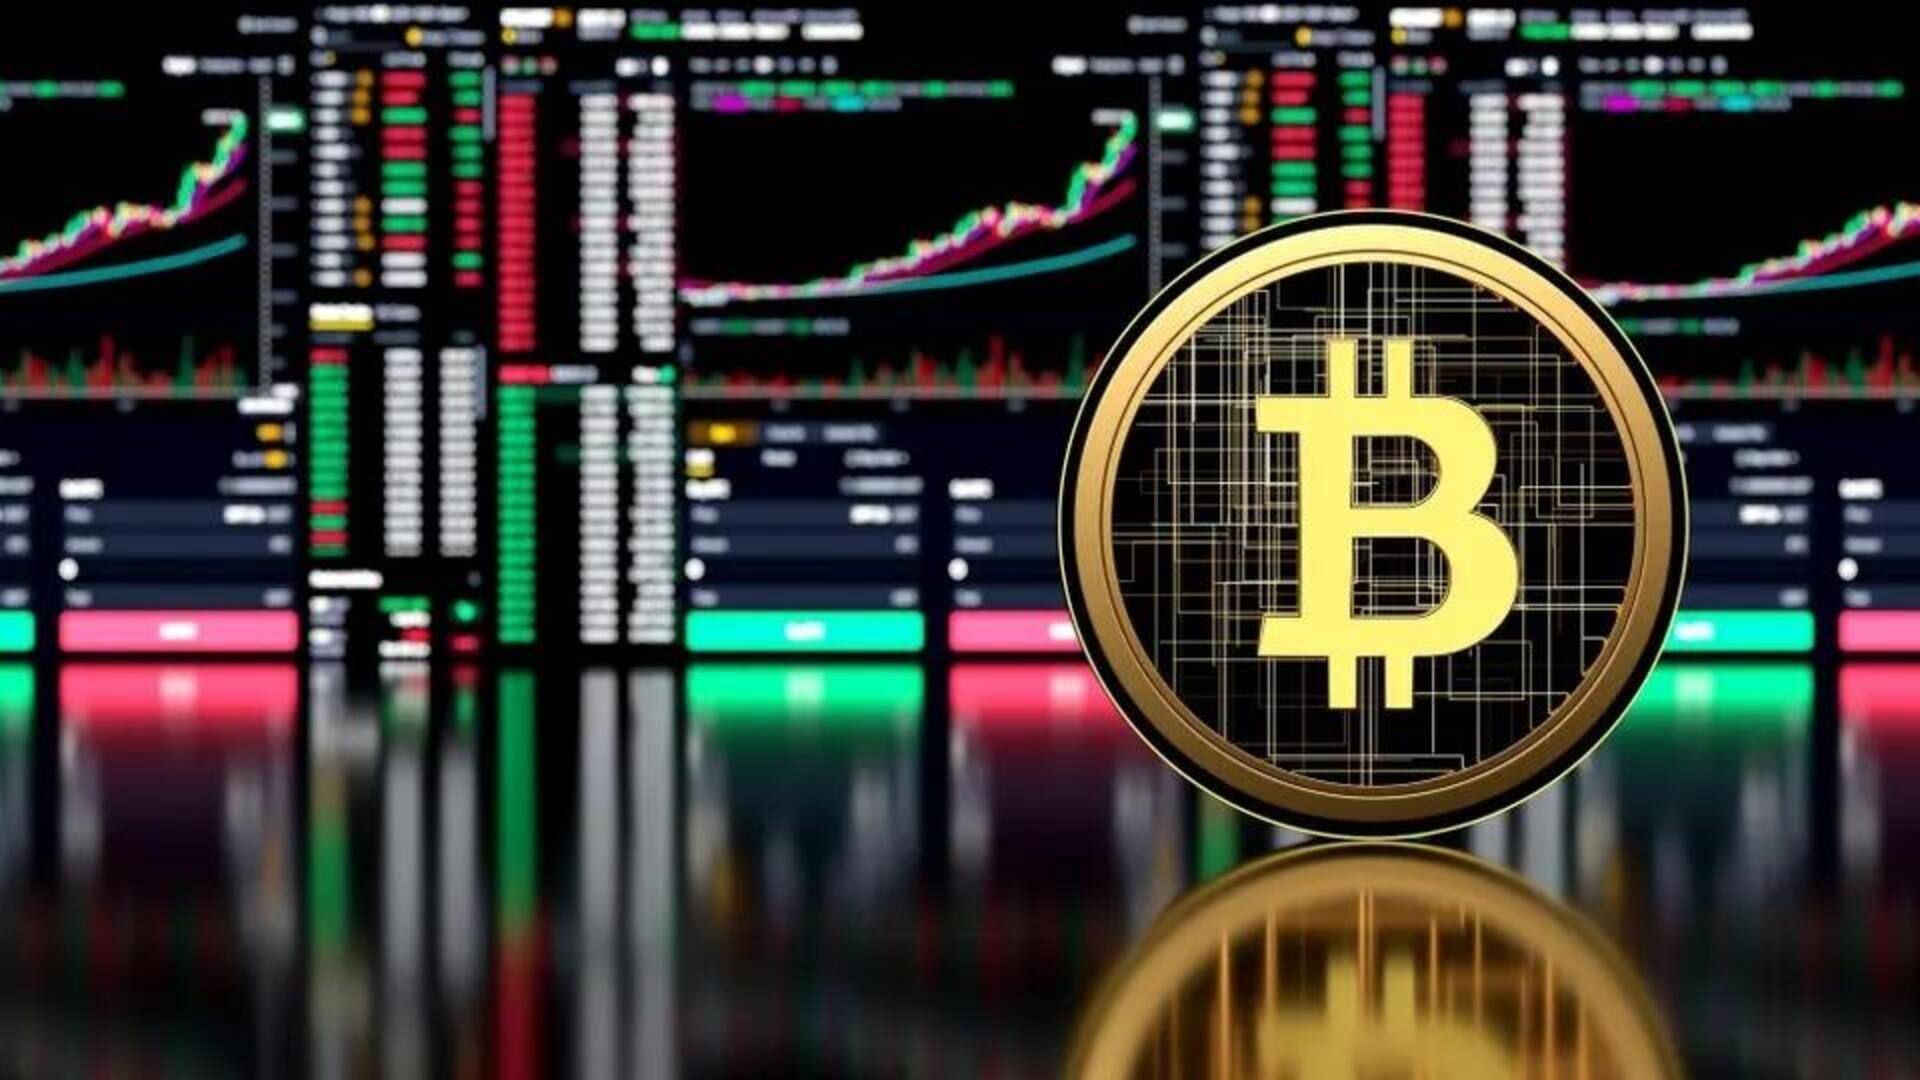 Cryptocurrency prices today: Check rates of Bitcoin, Dogecoin, Tether, Solana